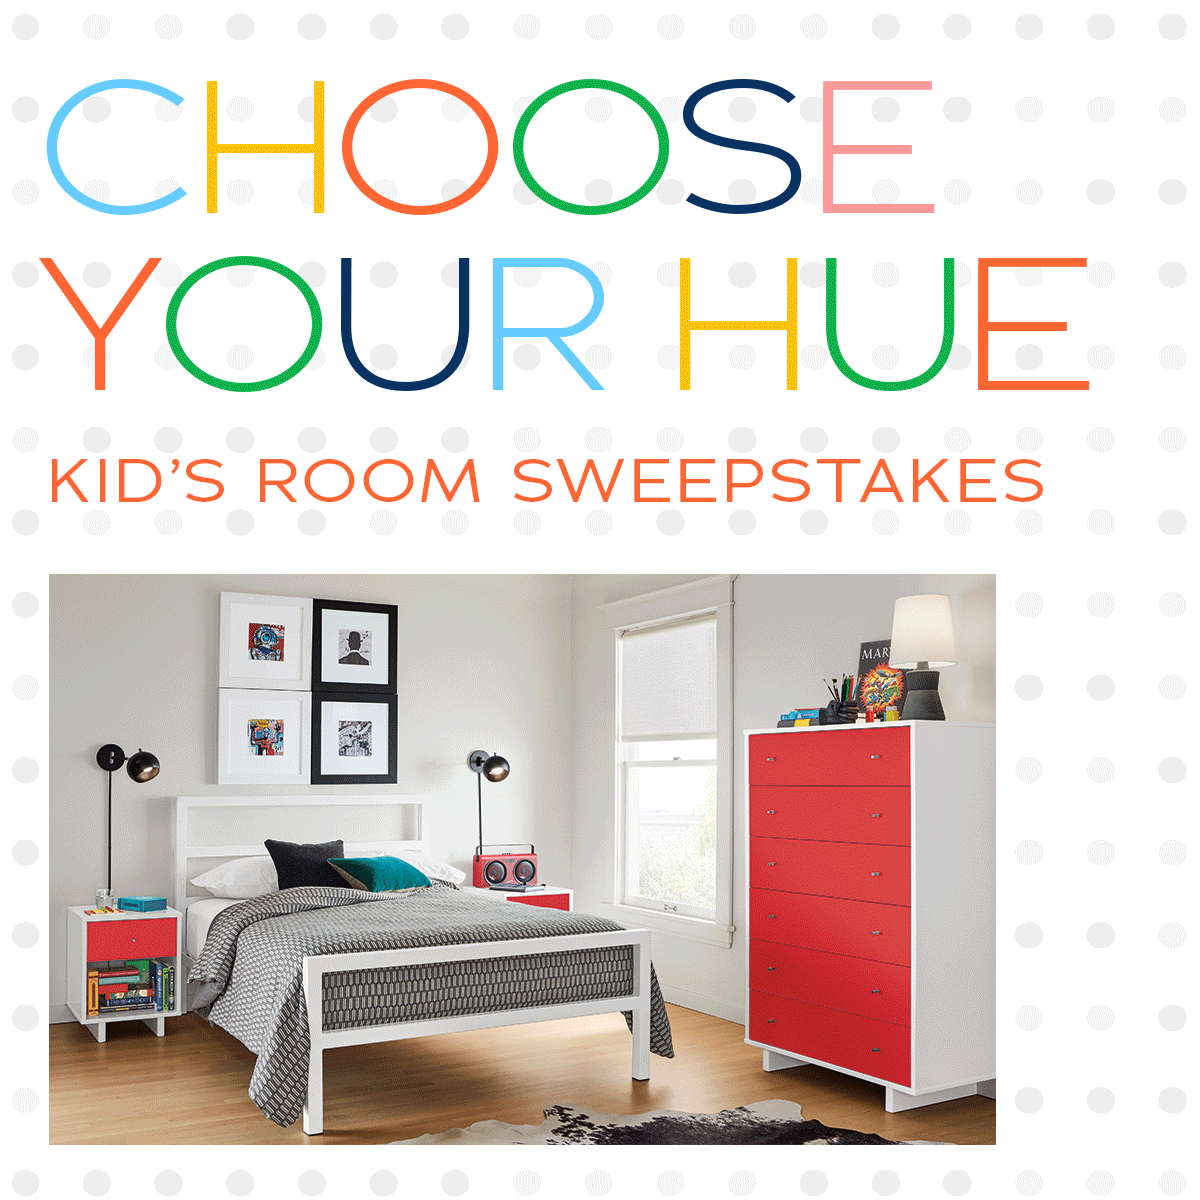 Choose Your Hue kid's room sweepstakes